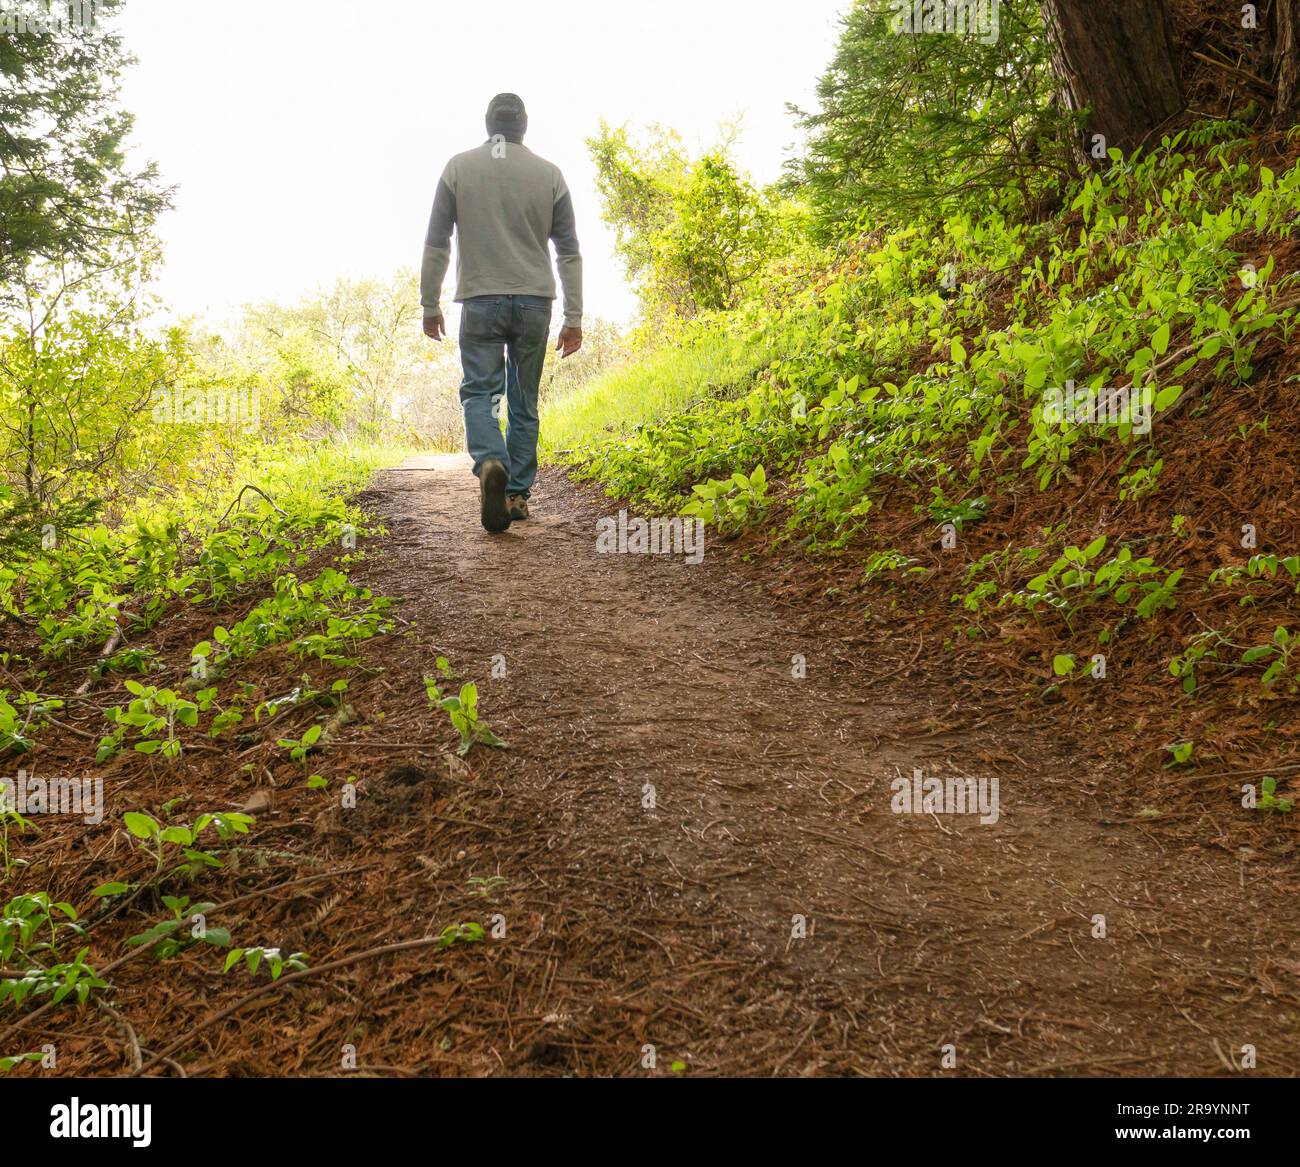 Man walking away on a trail through the woods towards a bright lit area with green shrub and trees on either side, Wearing jeans and a cap. Stock Photo